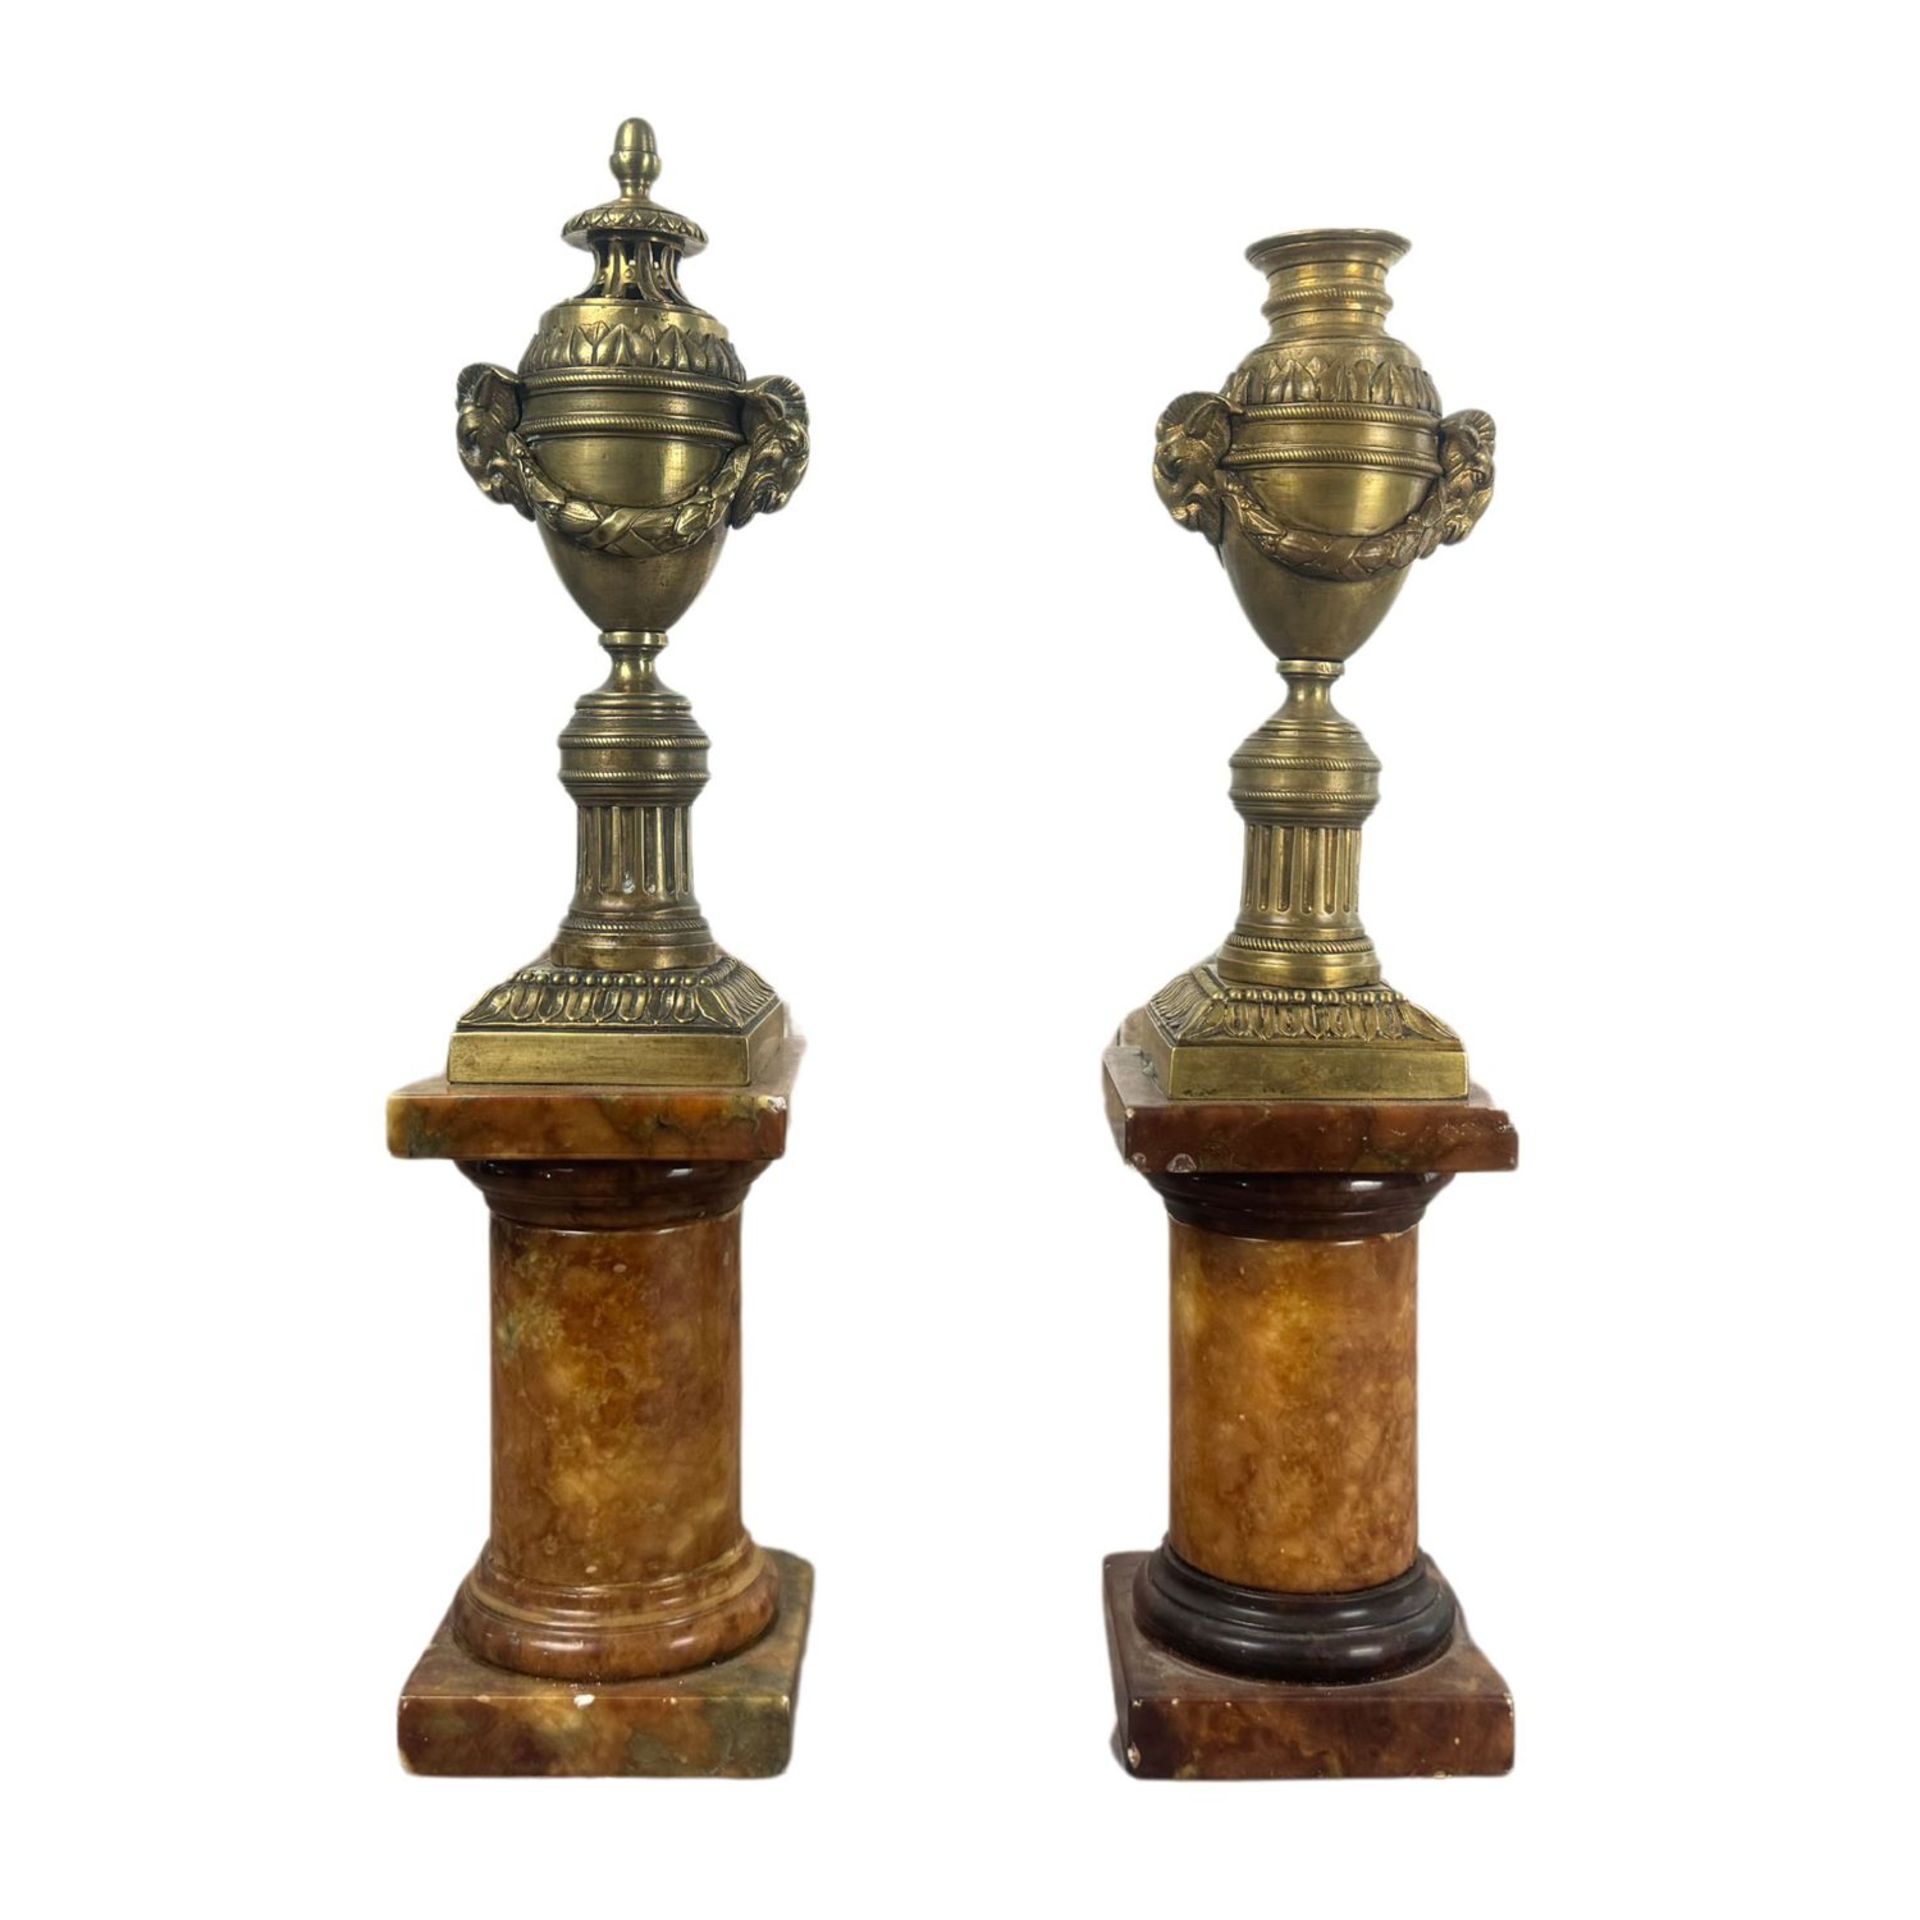 Pair of finely chiseled bronze candle holders